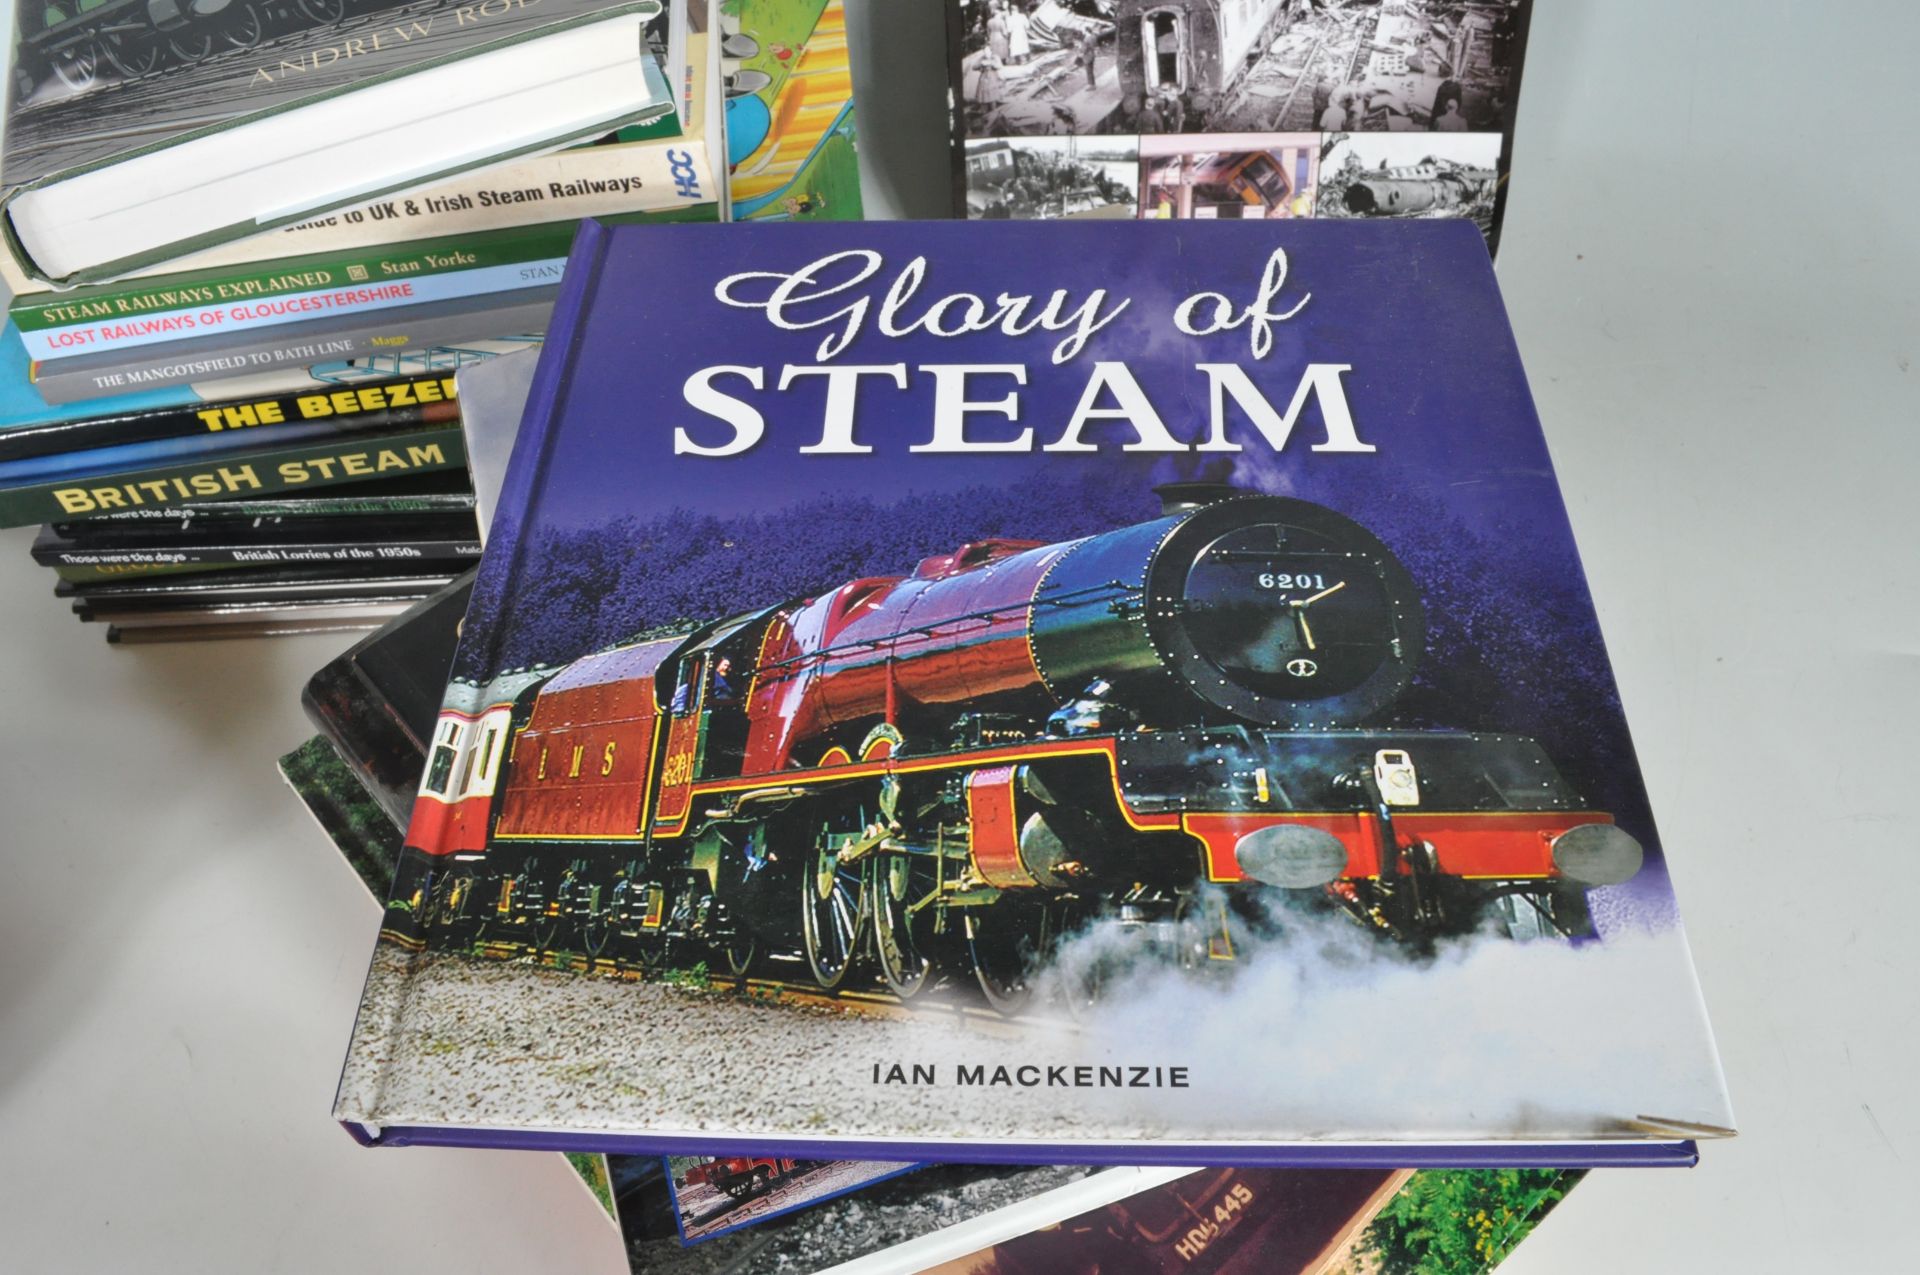 COLLECTION OF BRITAIN’S STEAM, RAILWAY AND TRANSPORT RELATED BOOKS - Image 8 of 8